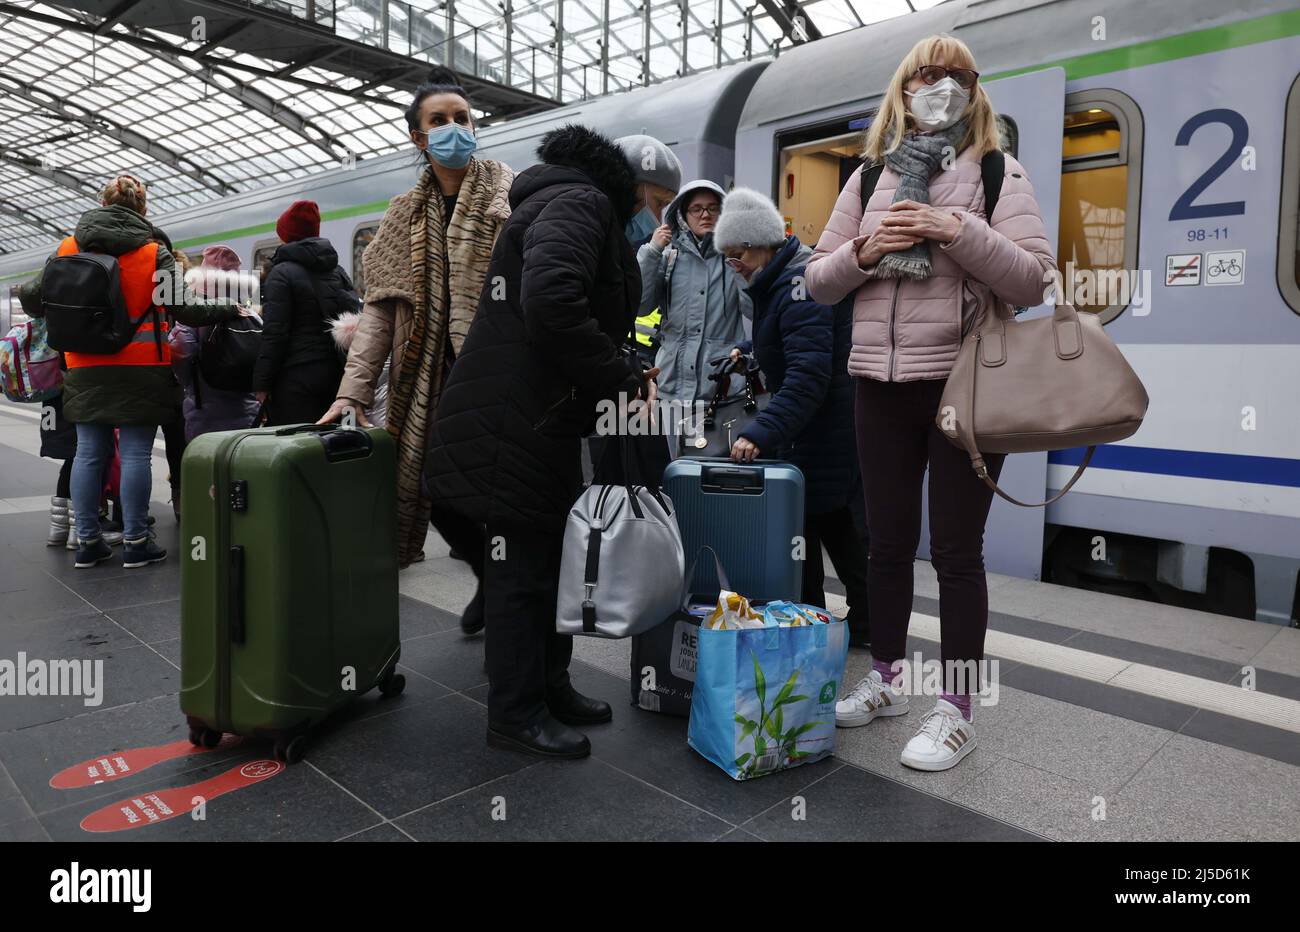 Berlin, 03.03.2022 - Refugees from Ukraine arrive at Berlin Central Station on a train from Poland. Thousands of refugees from Ukraine have already arrived in Germany. [automated translation] Stock Photo